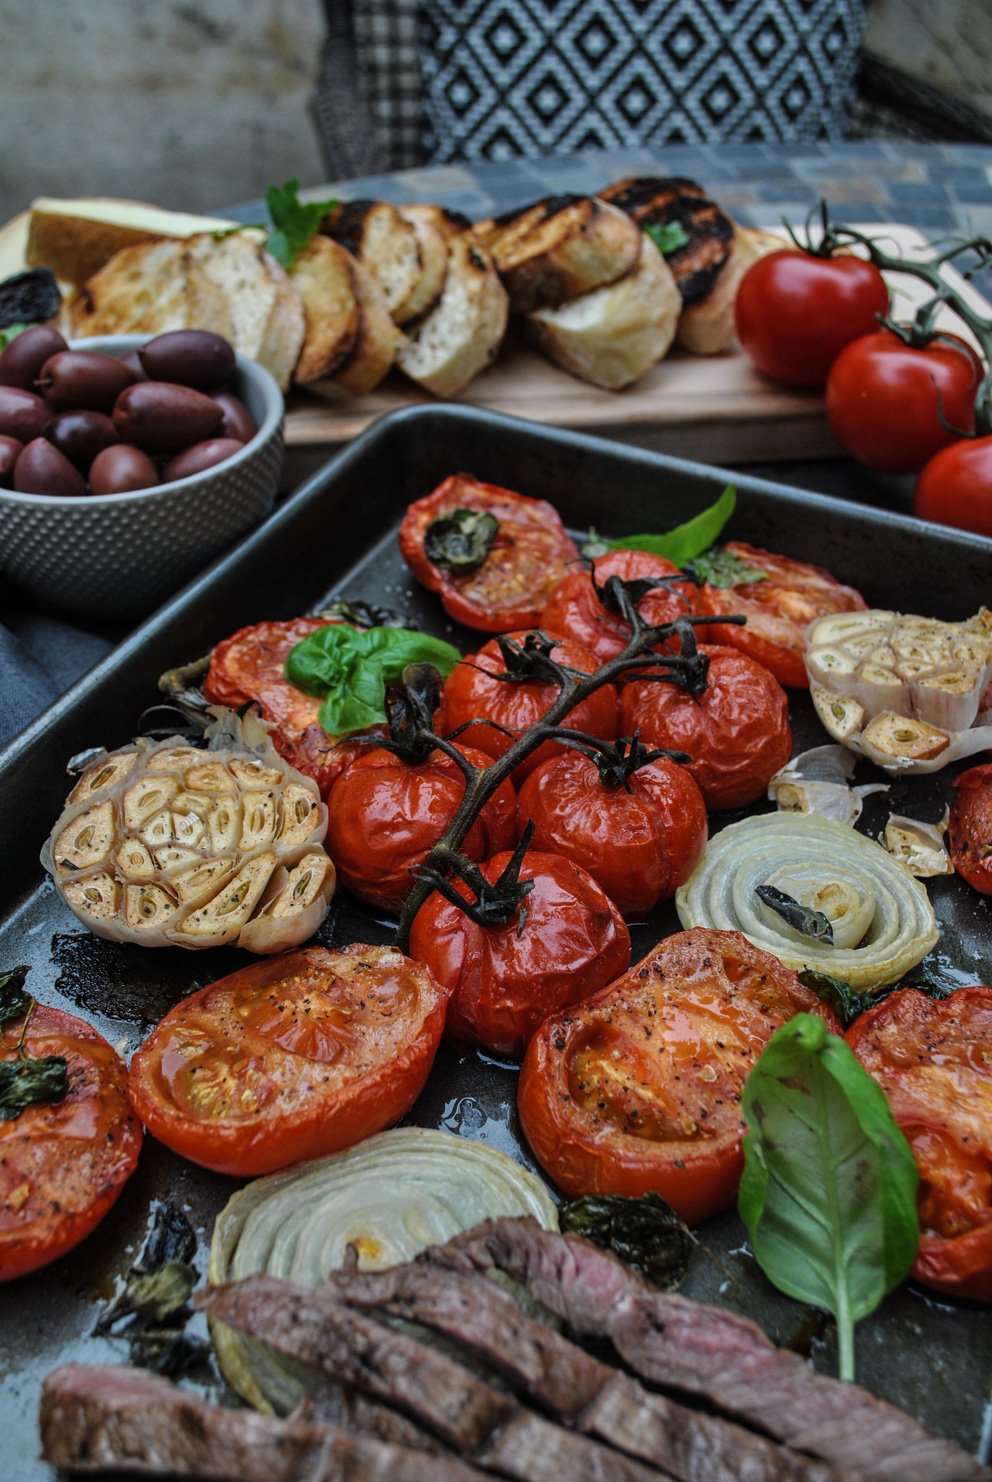 Lifestyle Blogger Jenny Meassick of Chocolate and Lace shares her recipe for Roasted Tomatoes, Garlic and Herbs